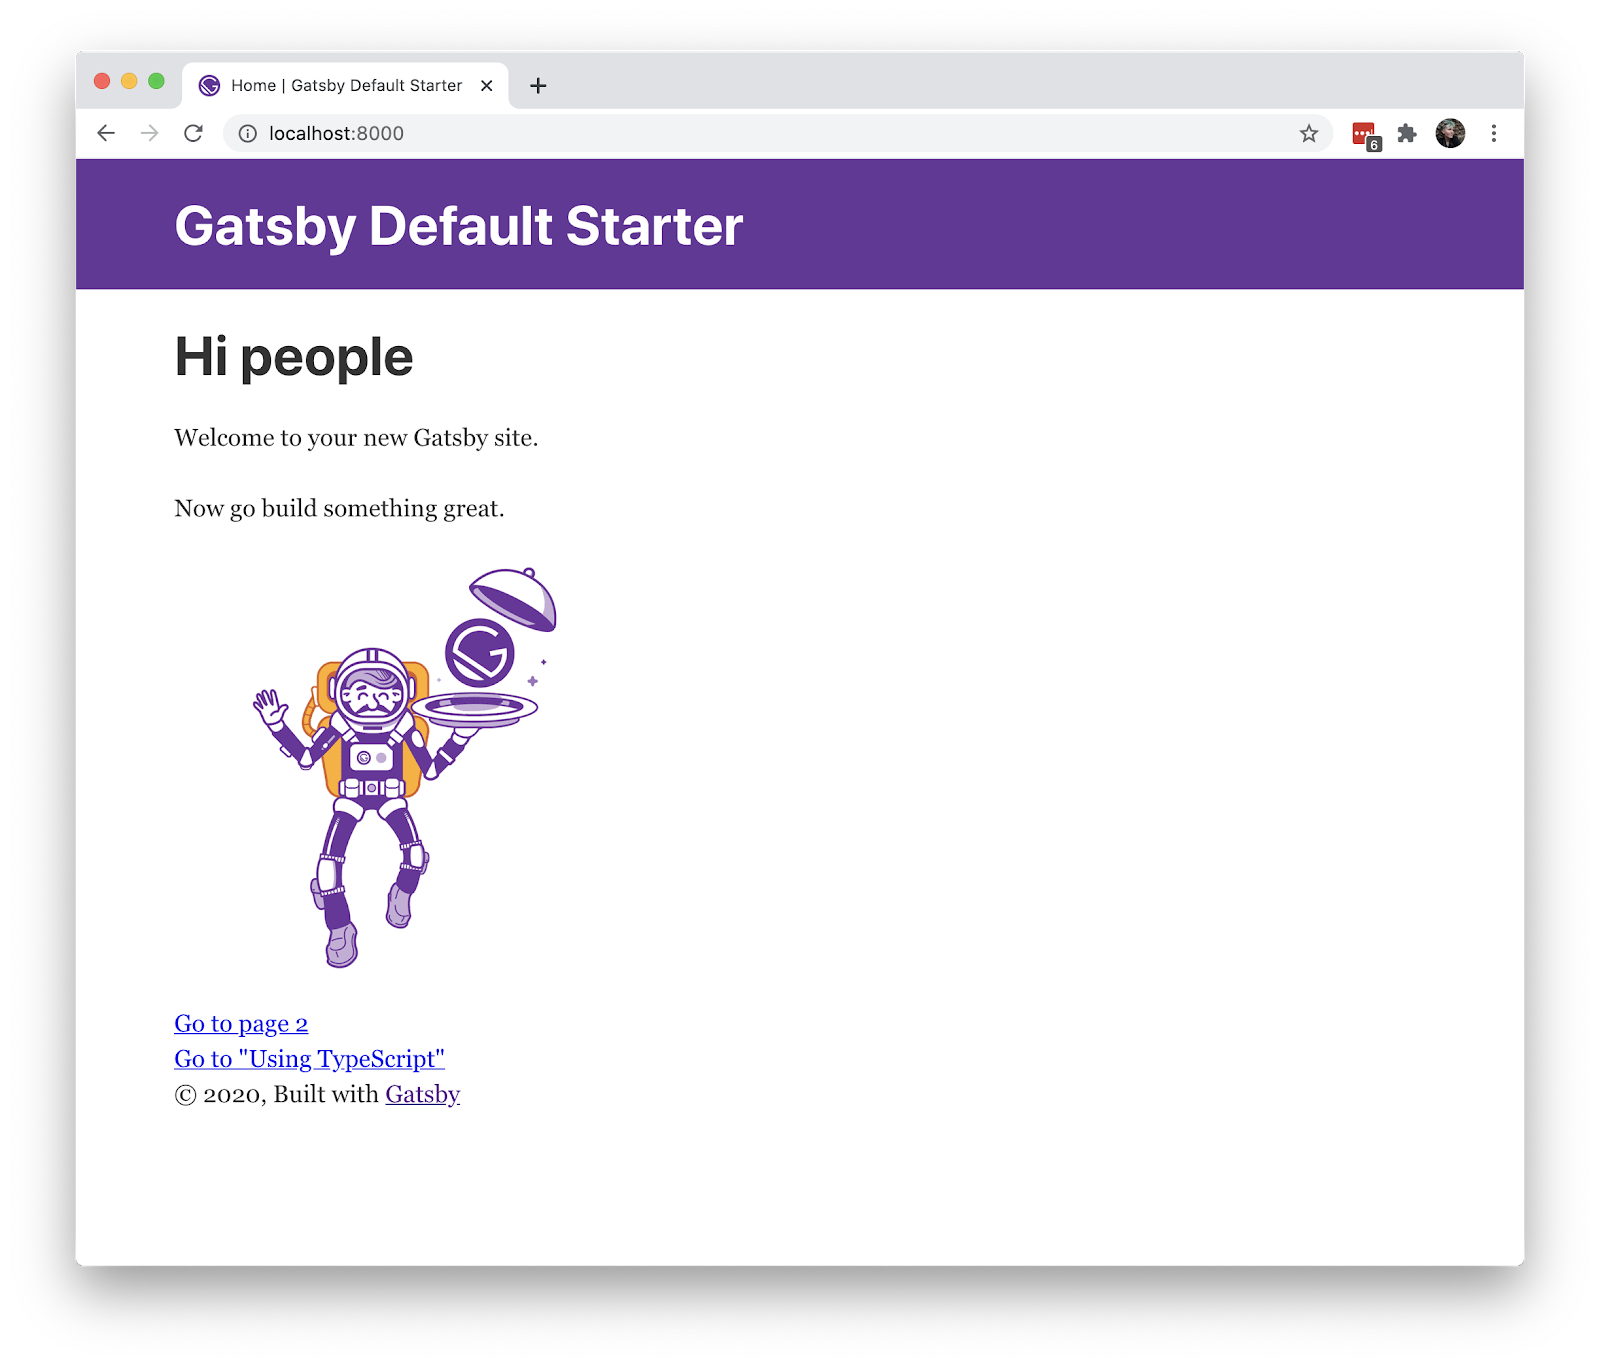 Screenshot of the Gatsby default starter project running in a browser on localhost. The starter contains text that says "Hi People. Welcome to your new Gatsby site. Now go build something great."